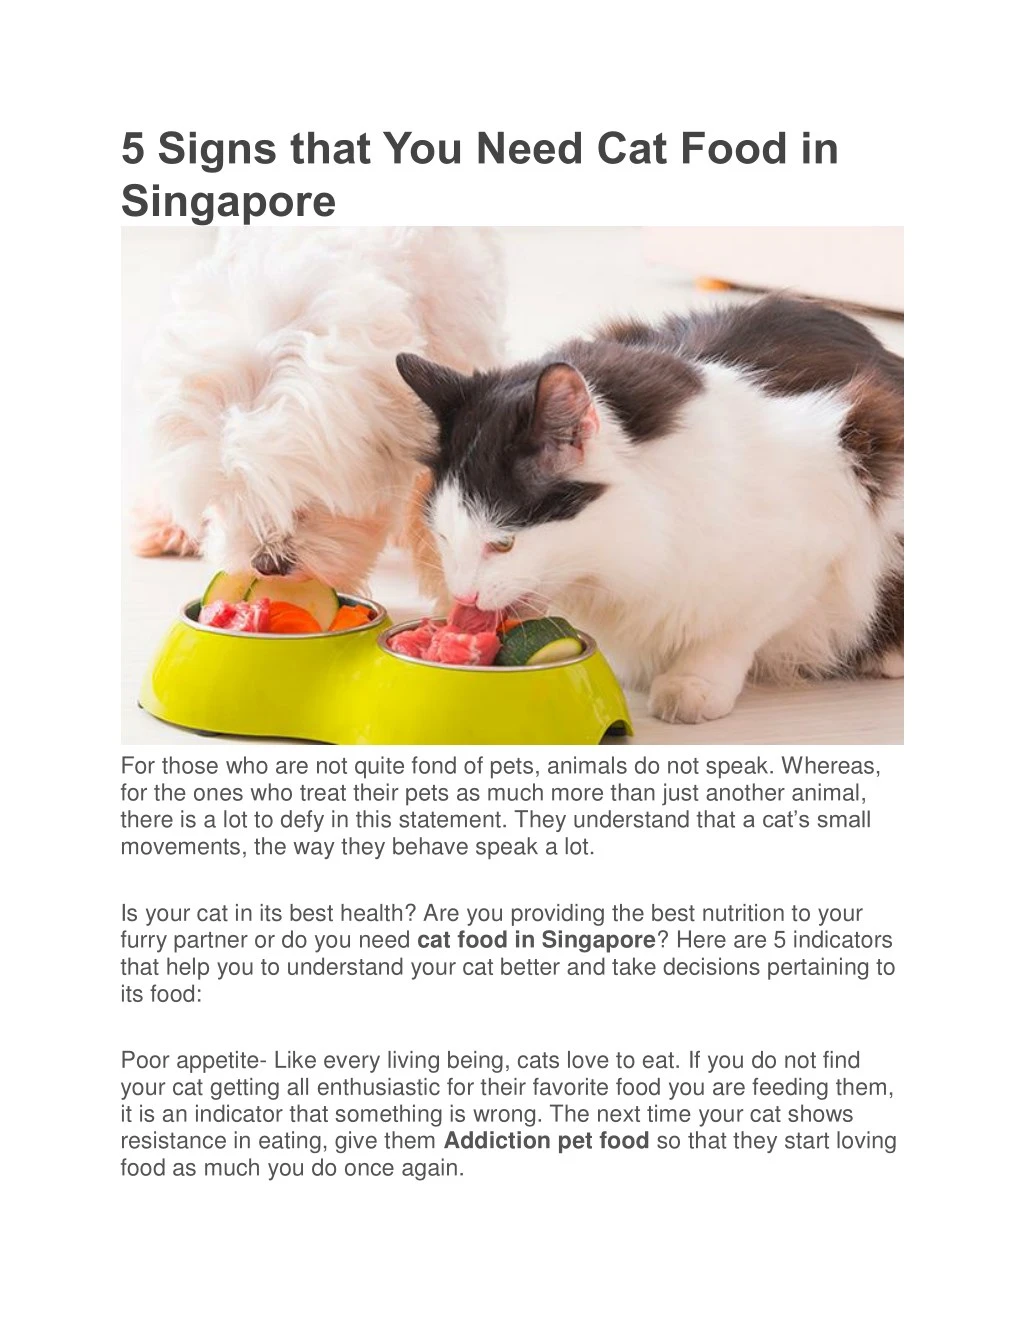 5 signs that you need cat food in singapore